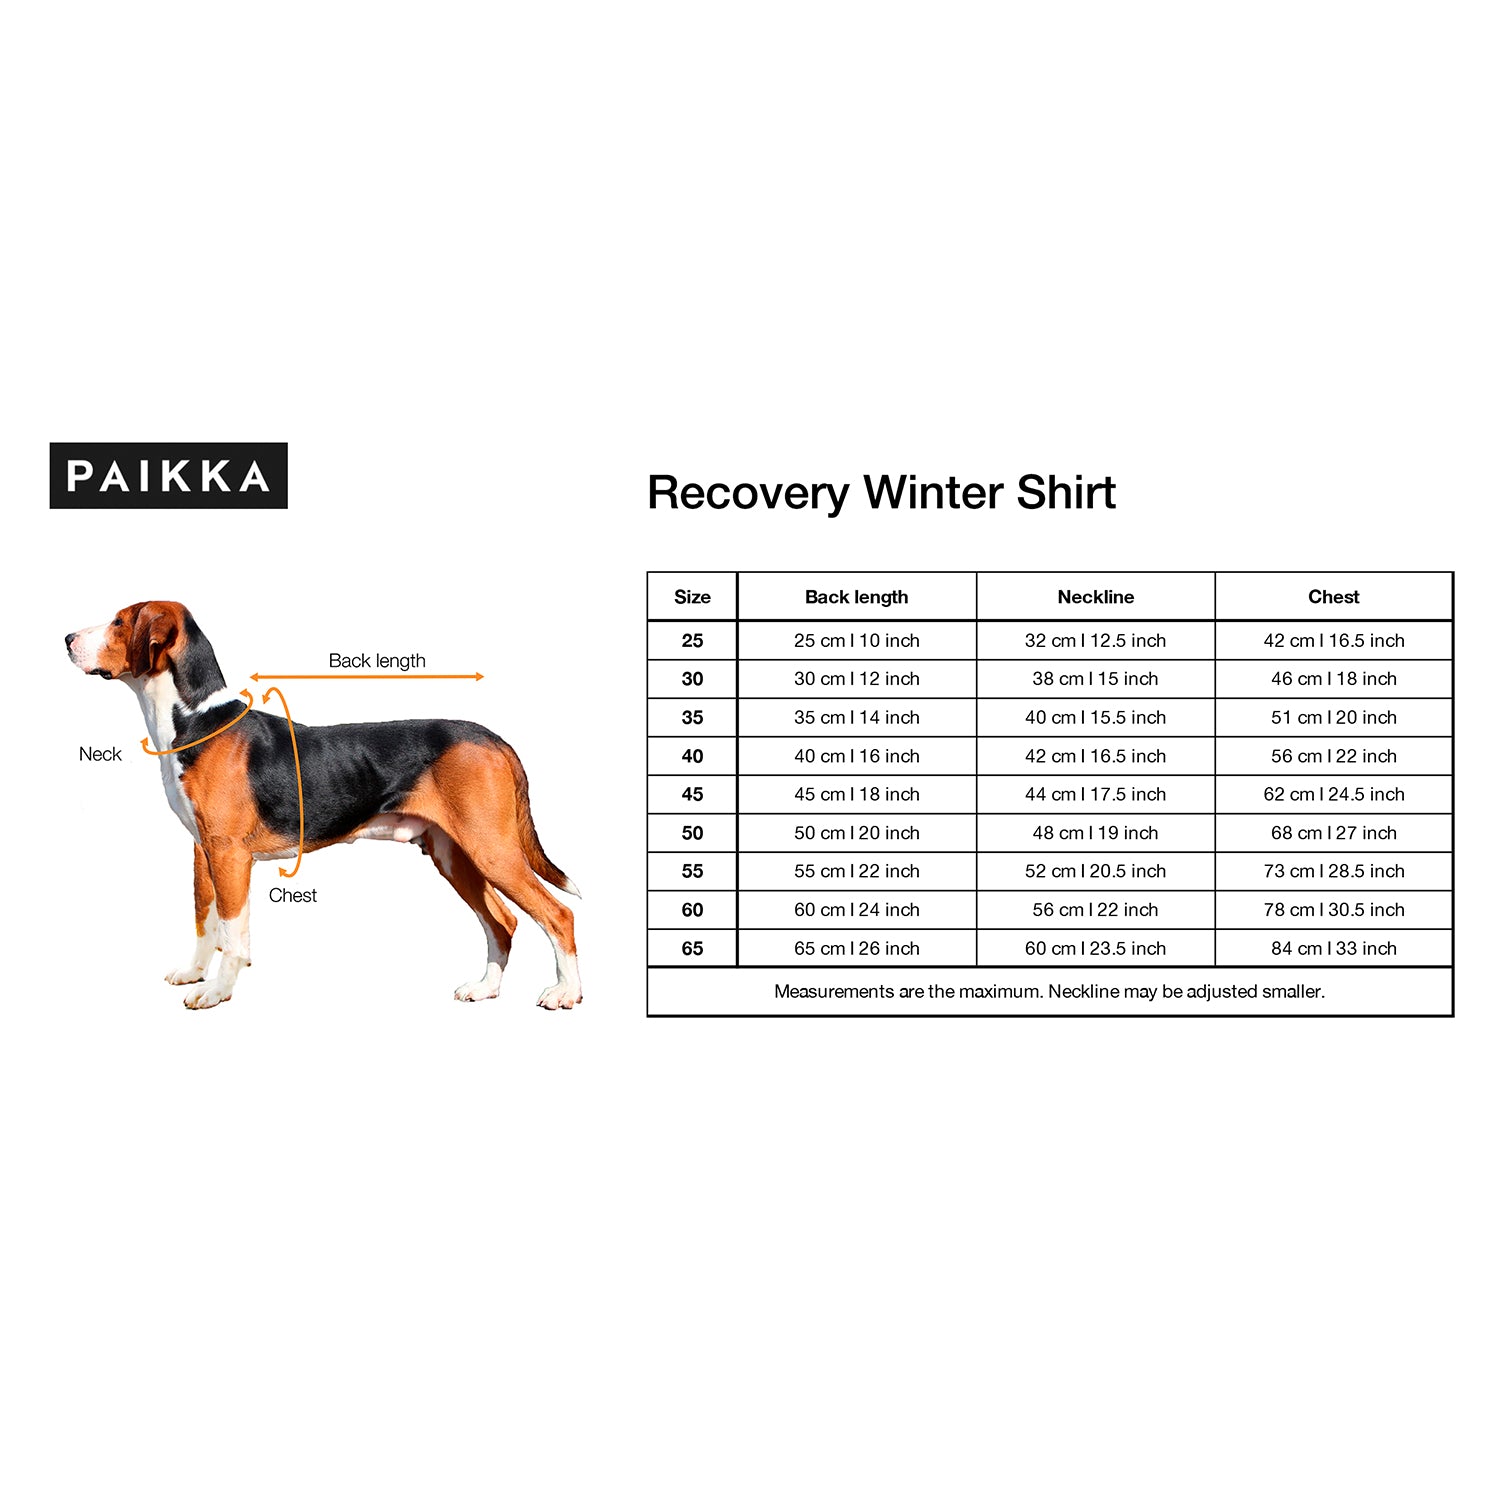 Recovery winter shirt